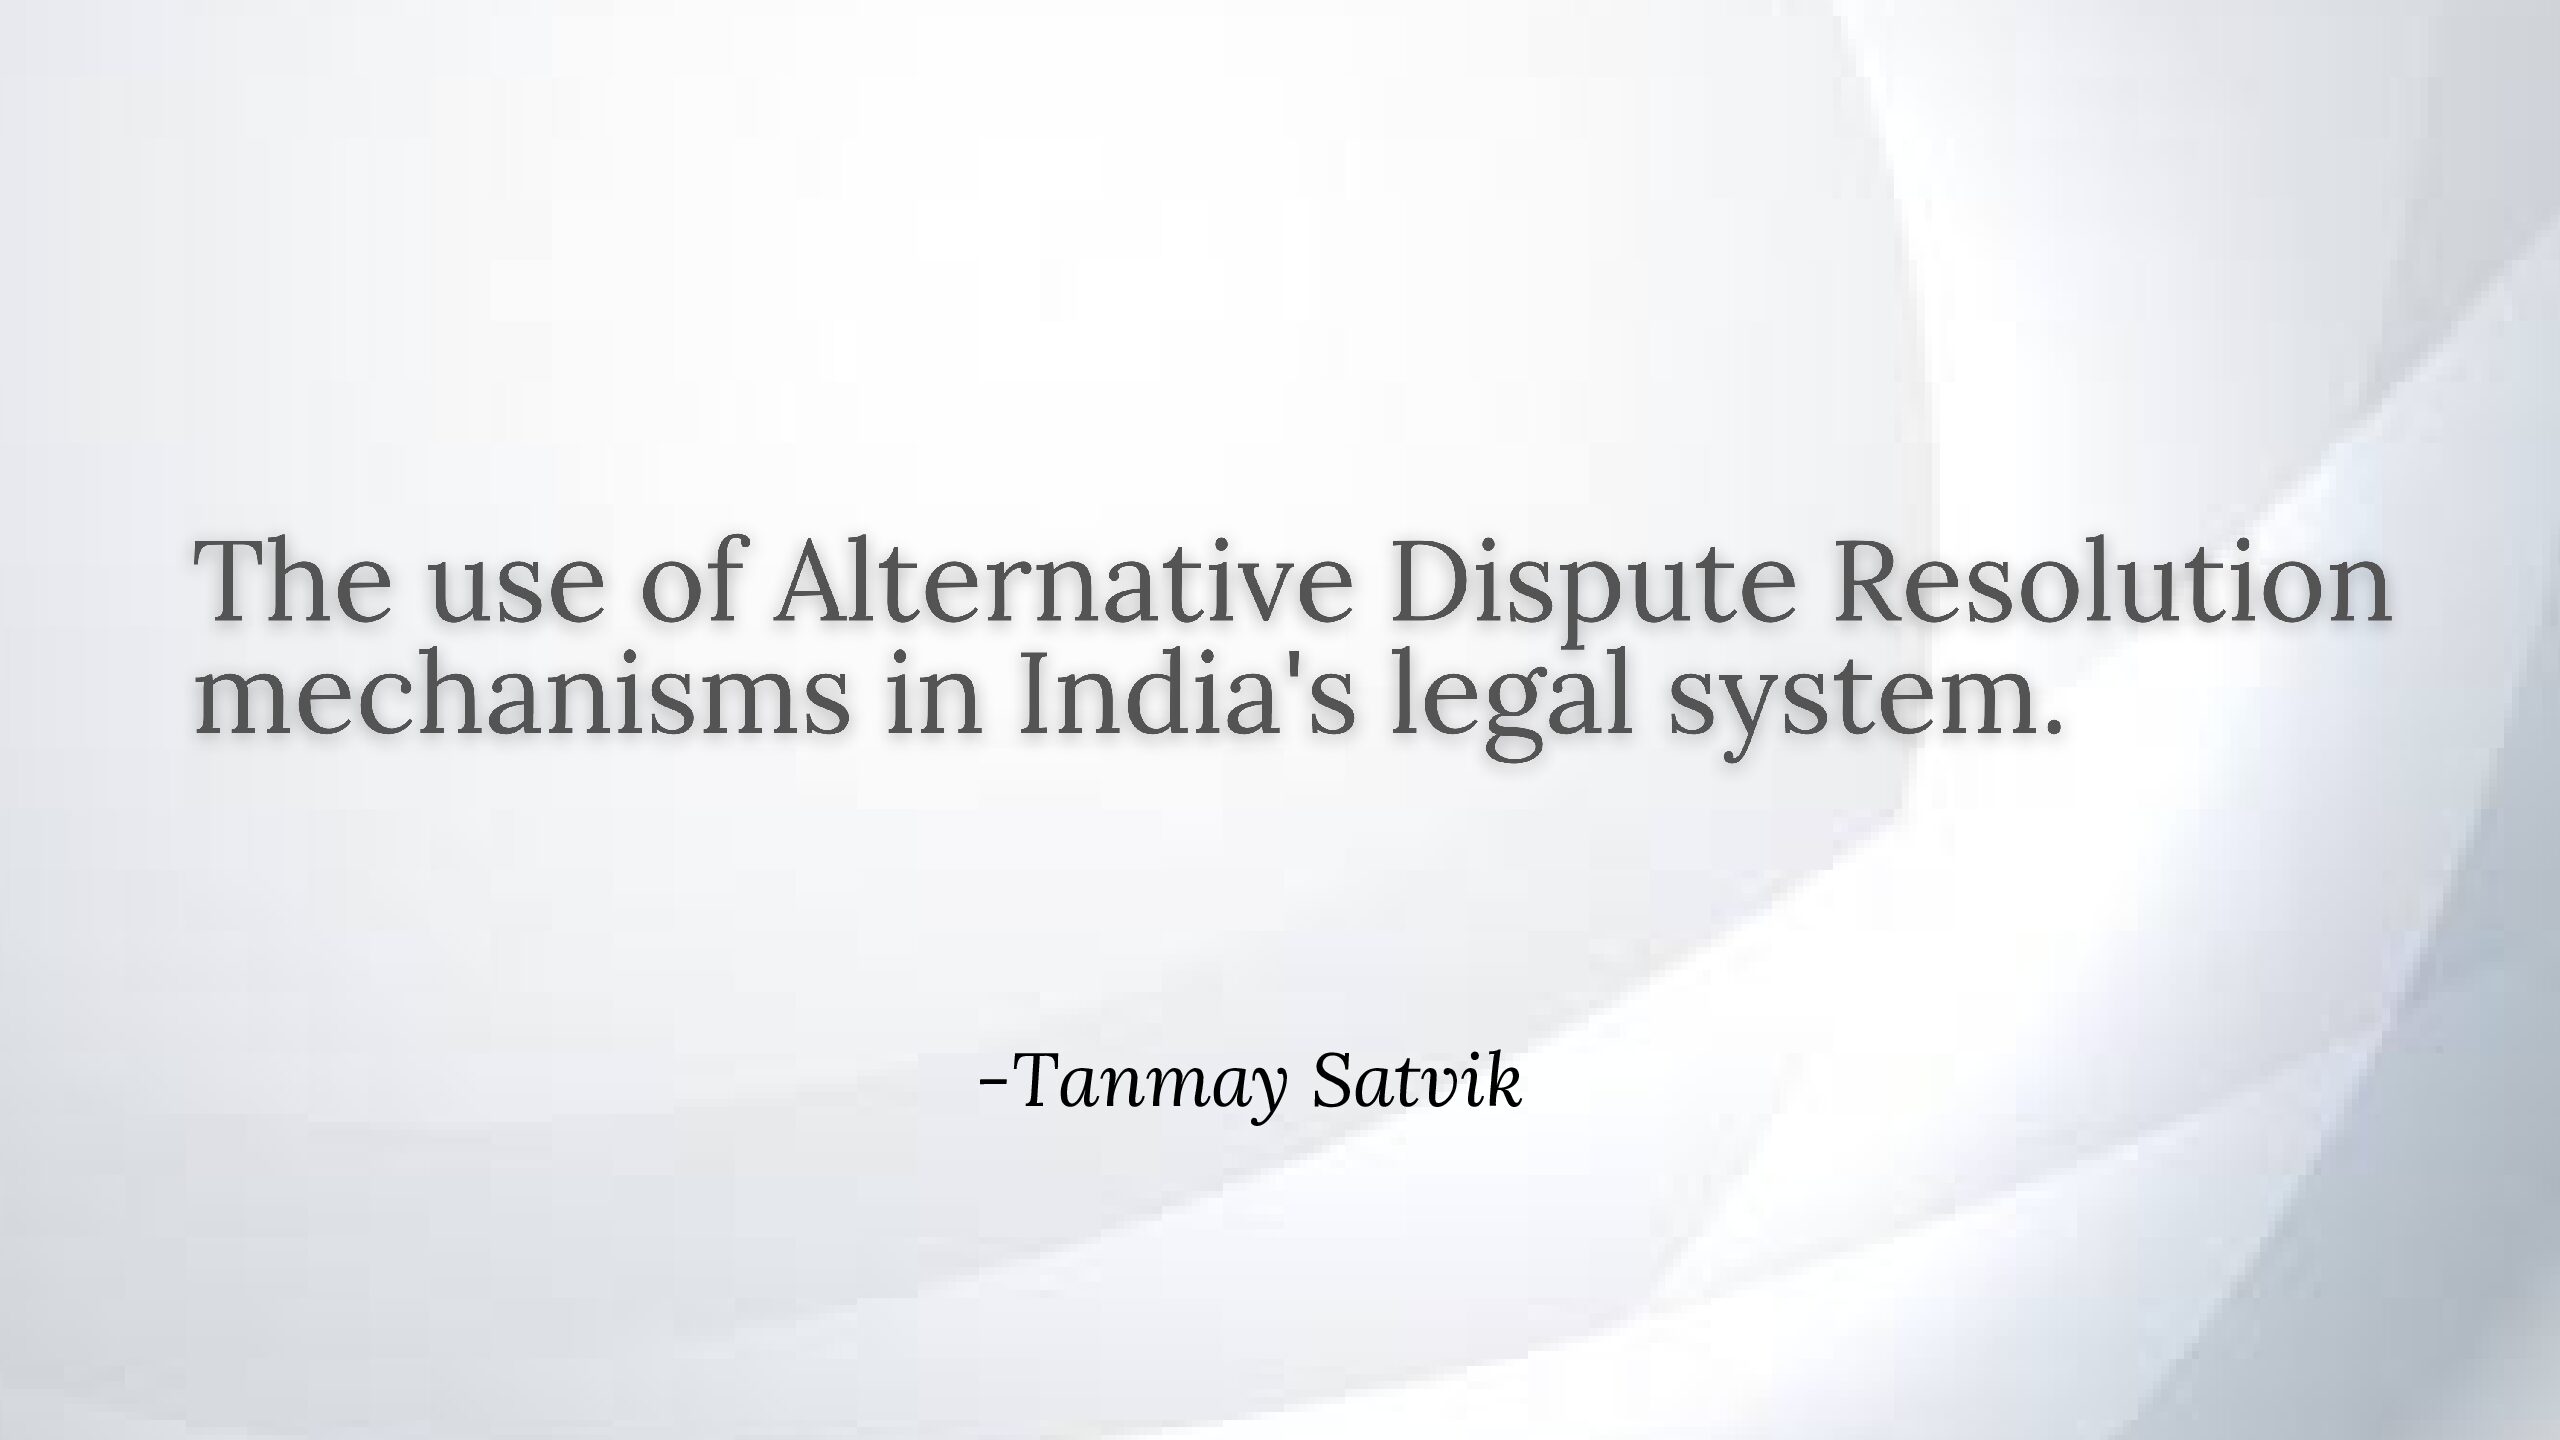 The use of Alternative Dispute Resolution mechanisms in India’s legal system